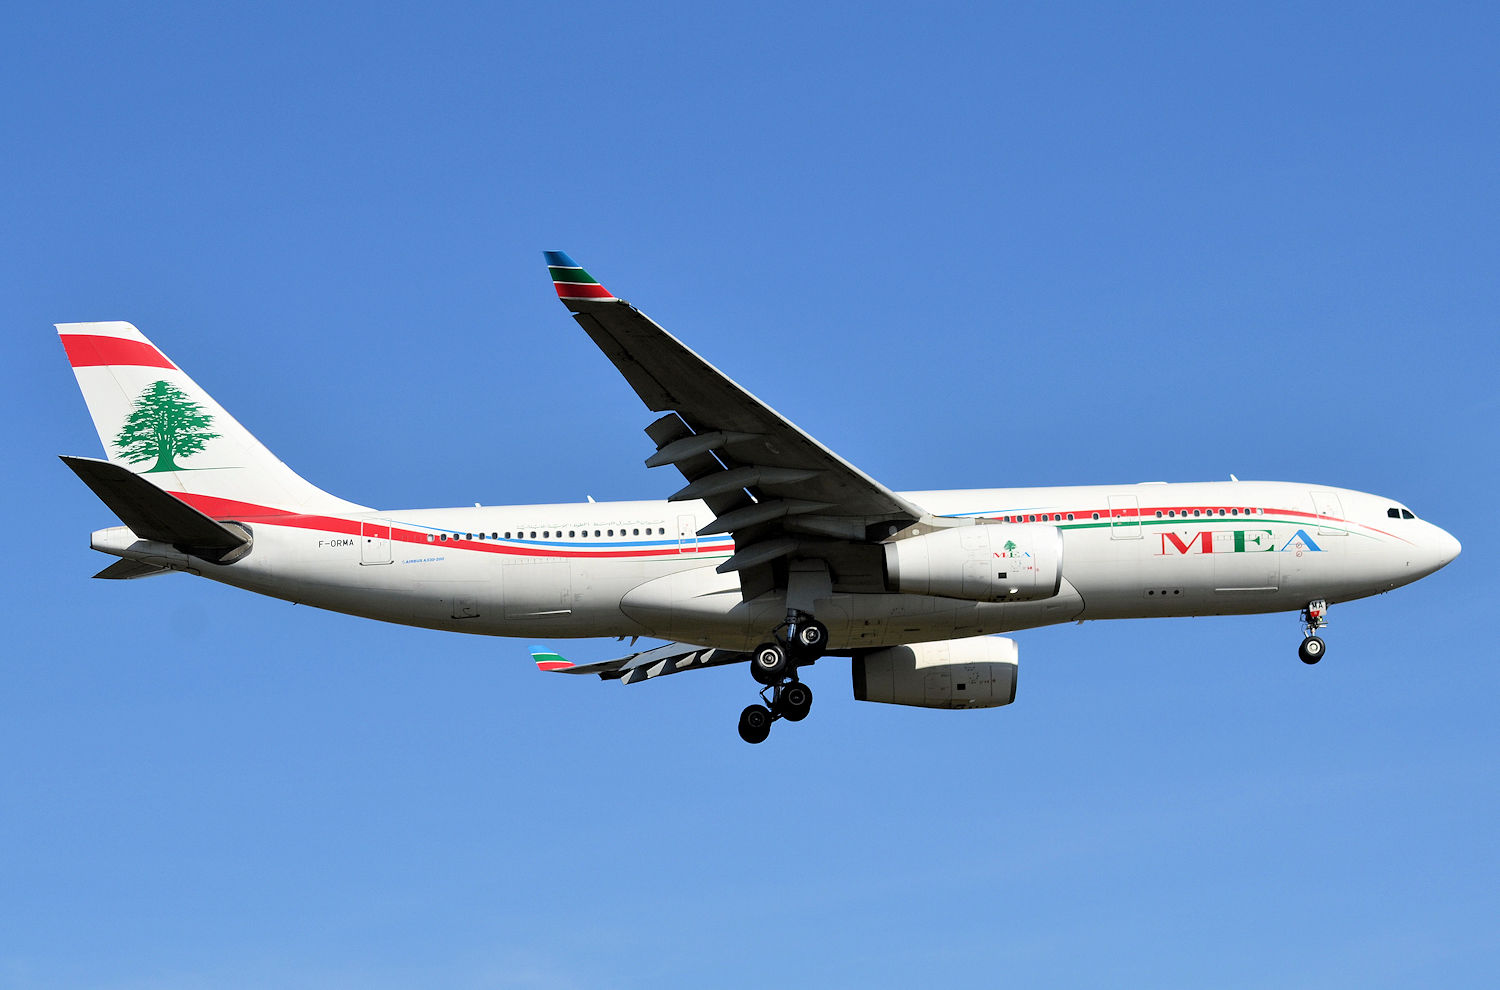 F-ORMA/FORMA MEA-Middle East Airlines Airbus A330-243 Photo by Warthog1 - AVSpotters.com